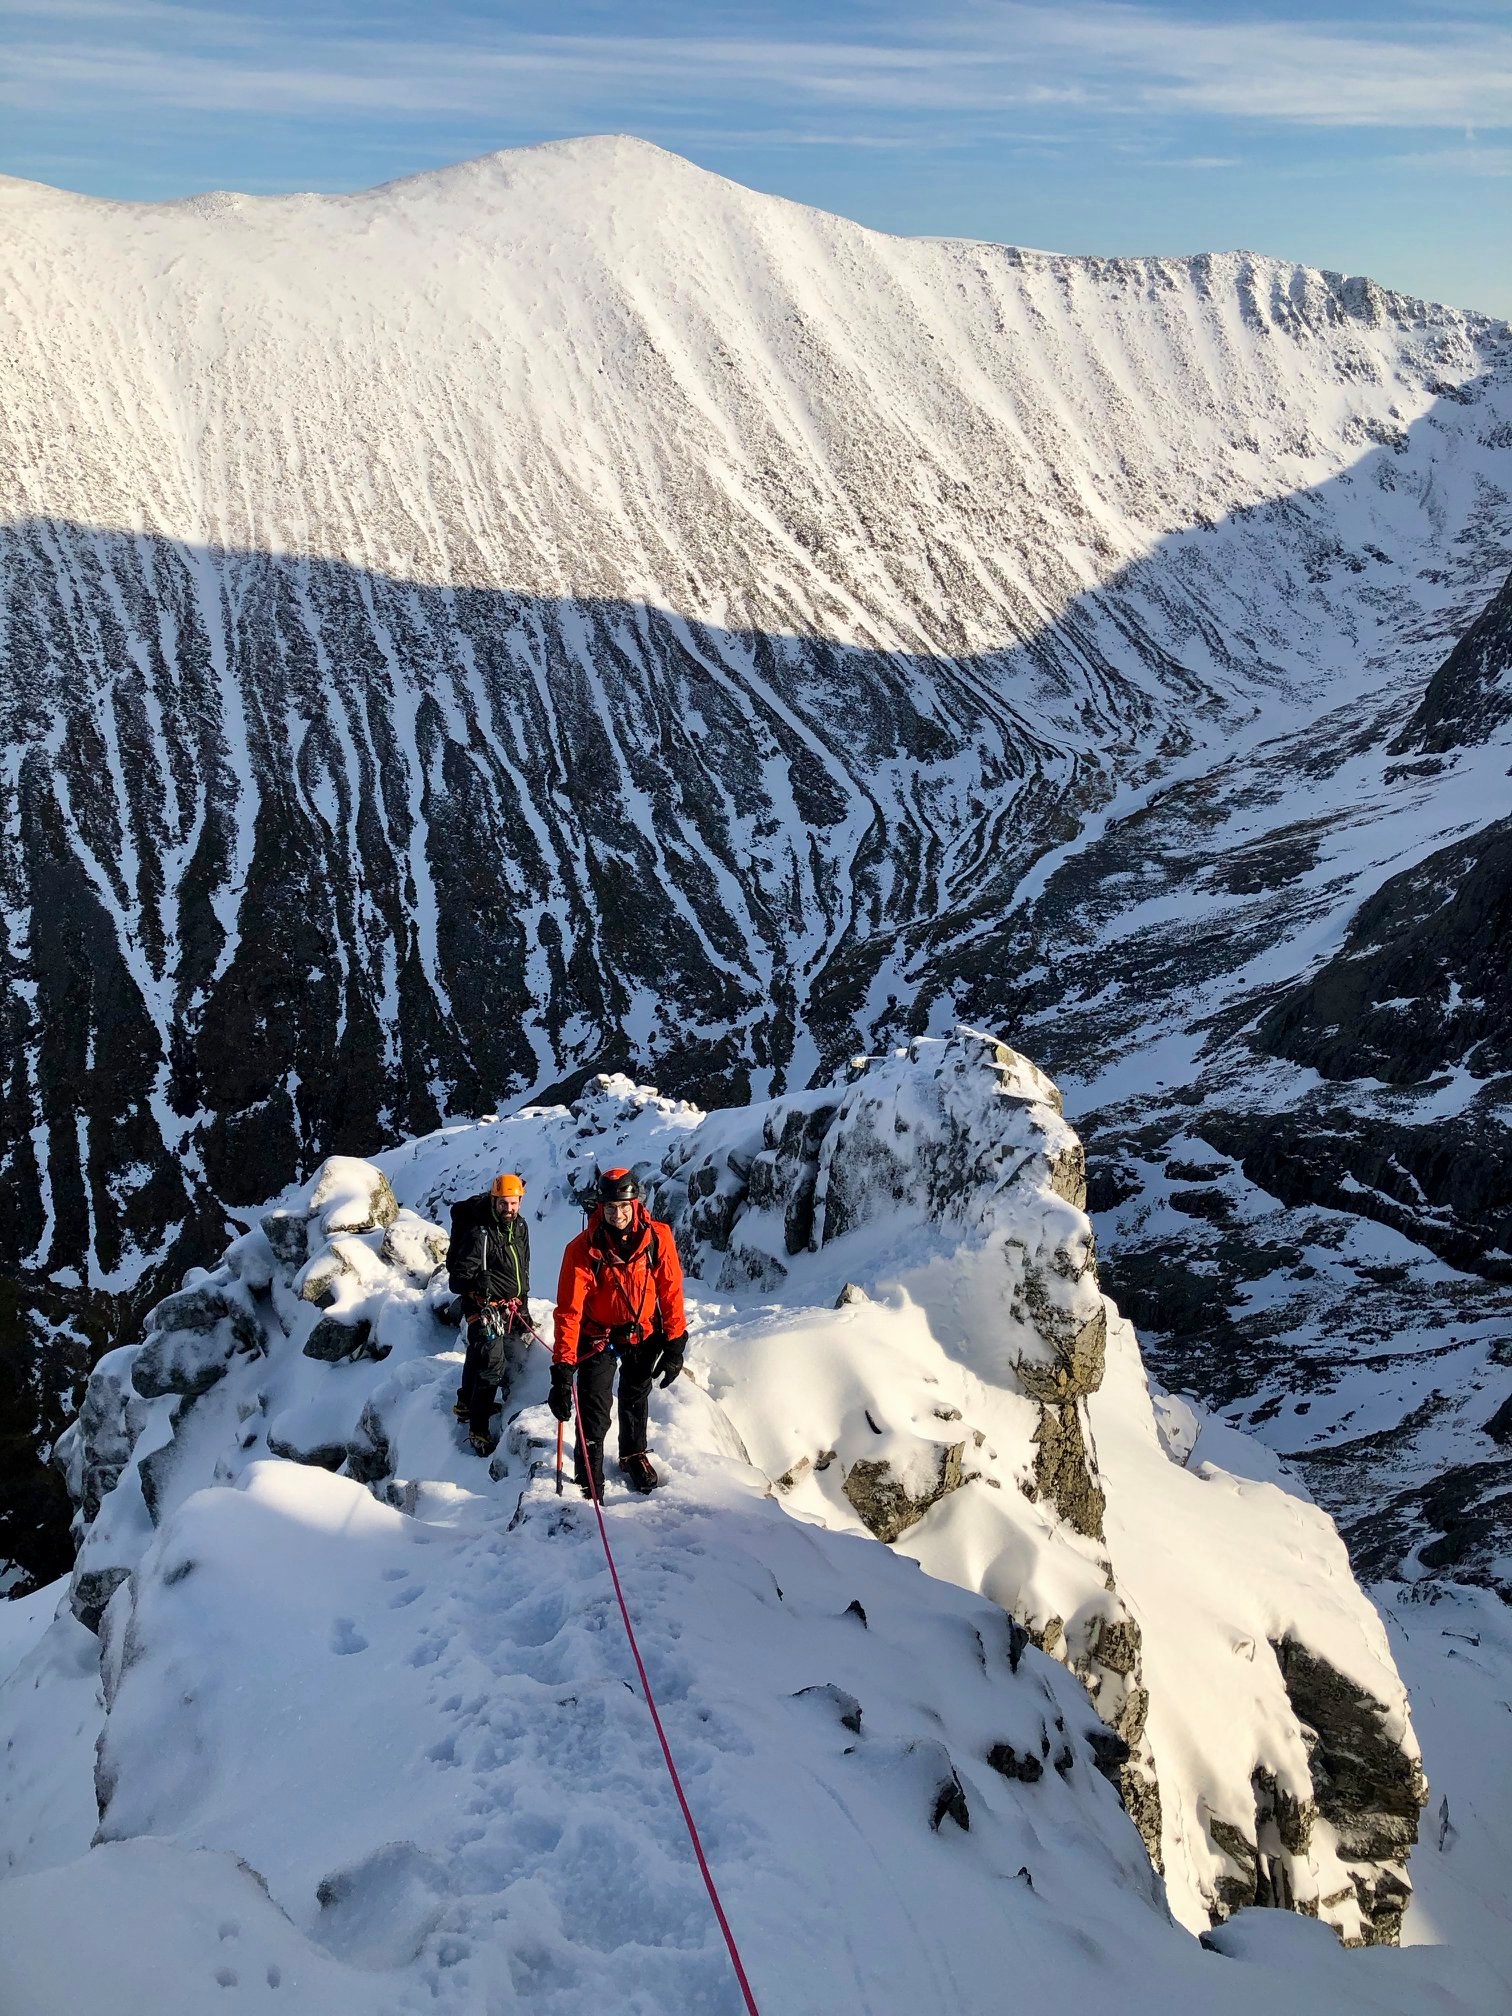 Two climbers are caught in a patch of sunlight as they make their way up Ledge Route, on Ben Nevis, which is covered in deep snow